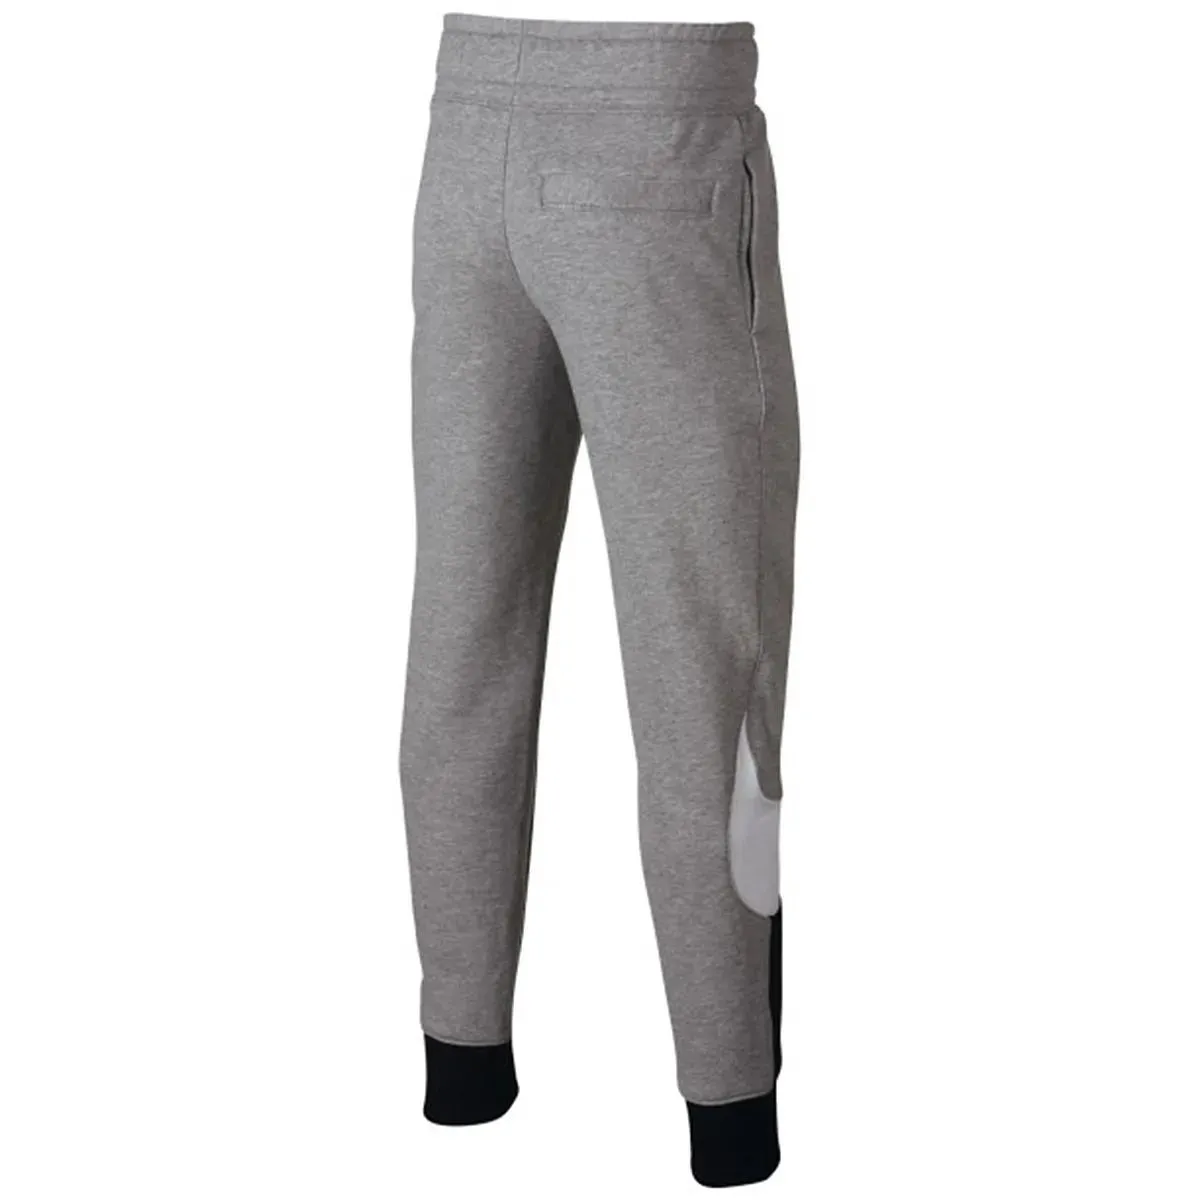 Nike ODJECA-D.DIO-B NSW HBR PANT FT STMT 